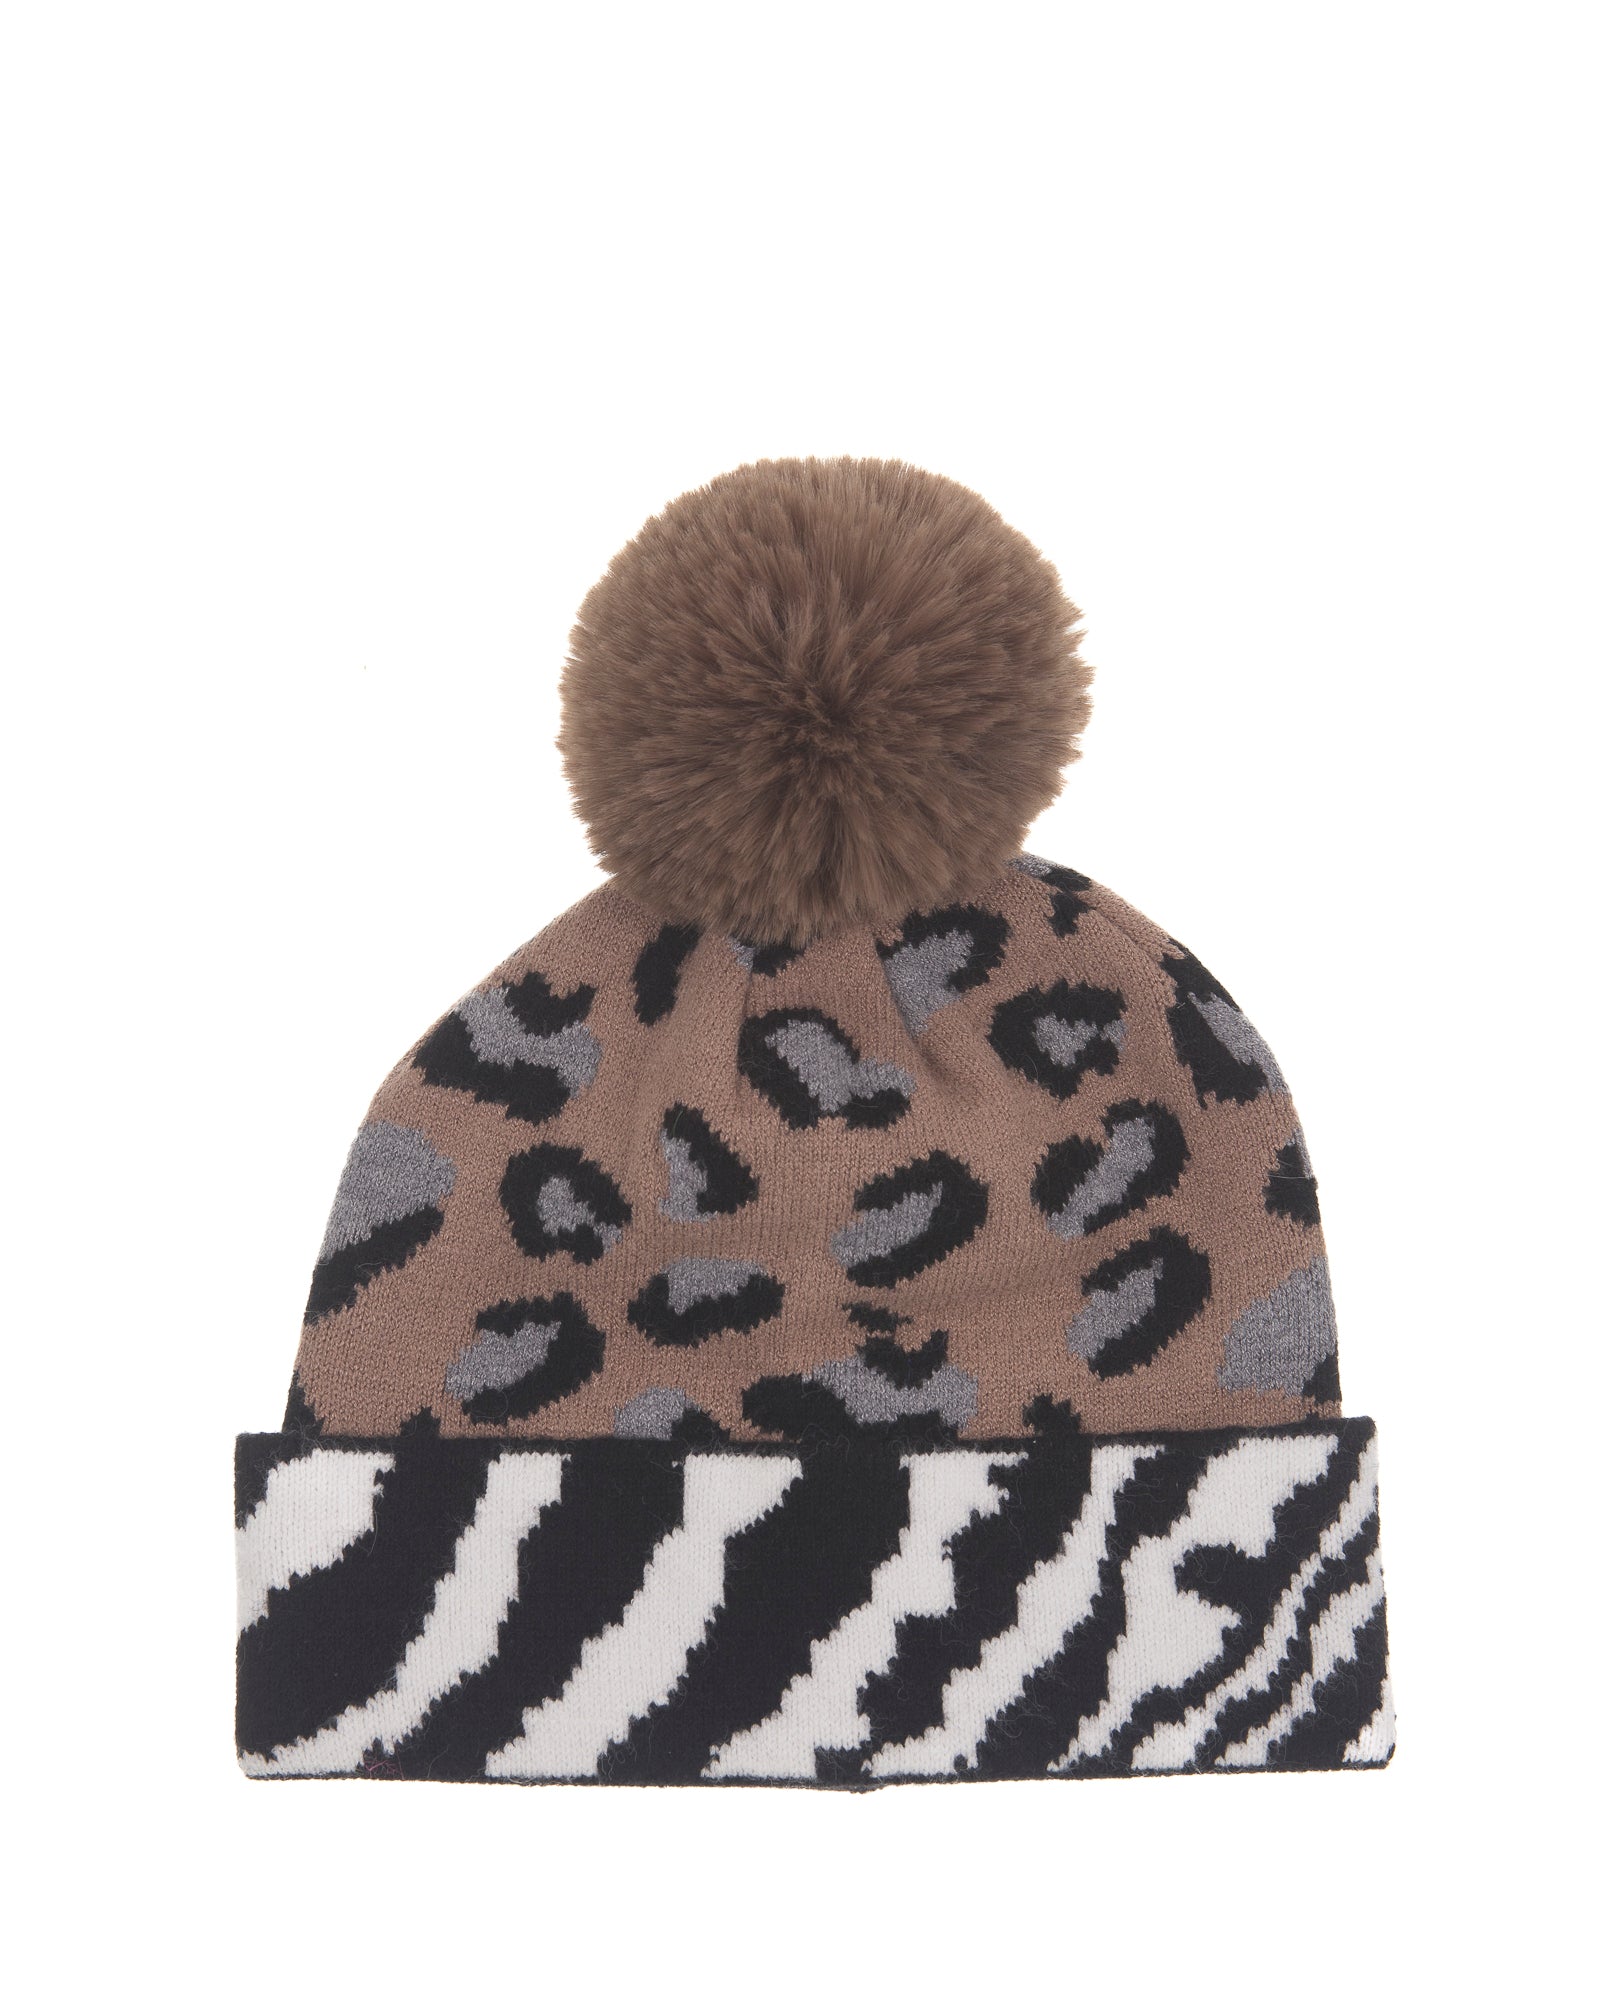 Mixed Animal Print Hat in Taupe